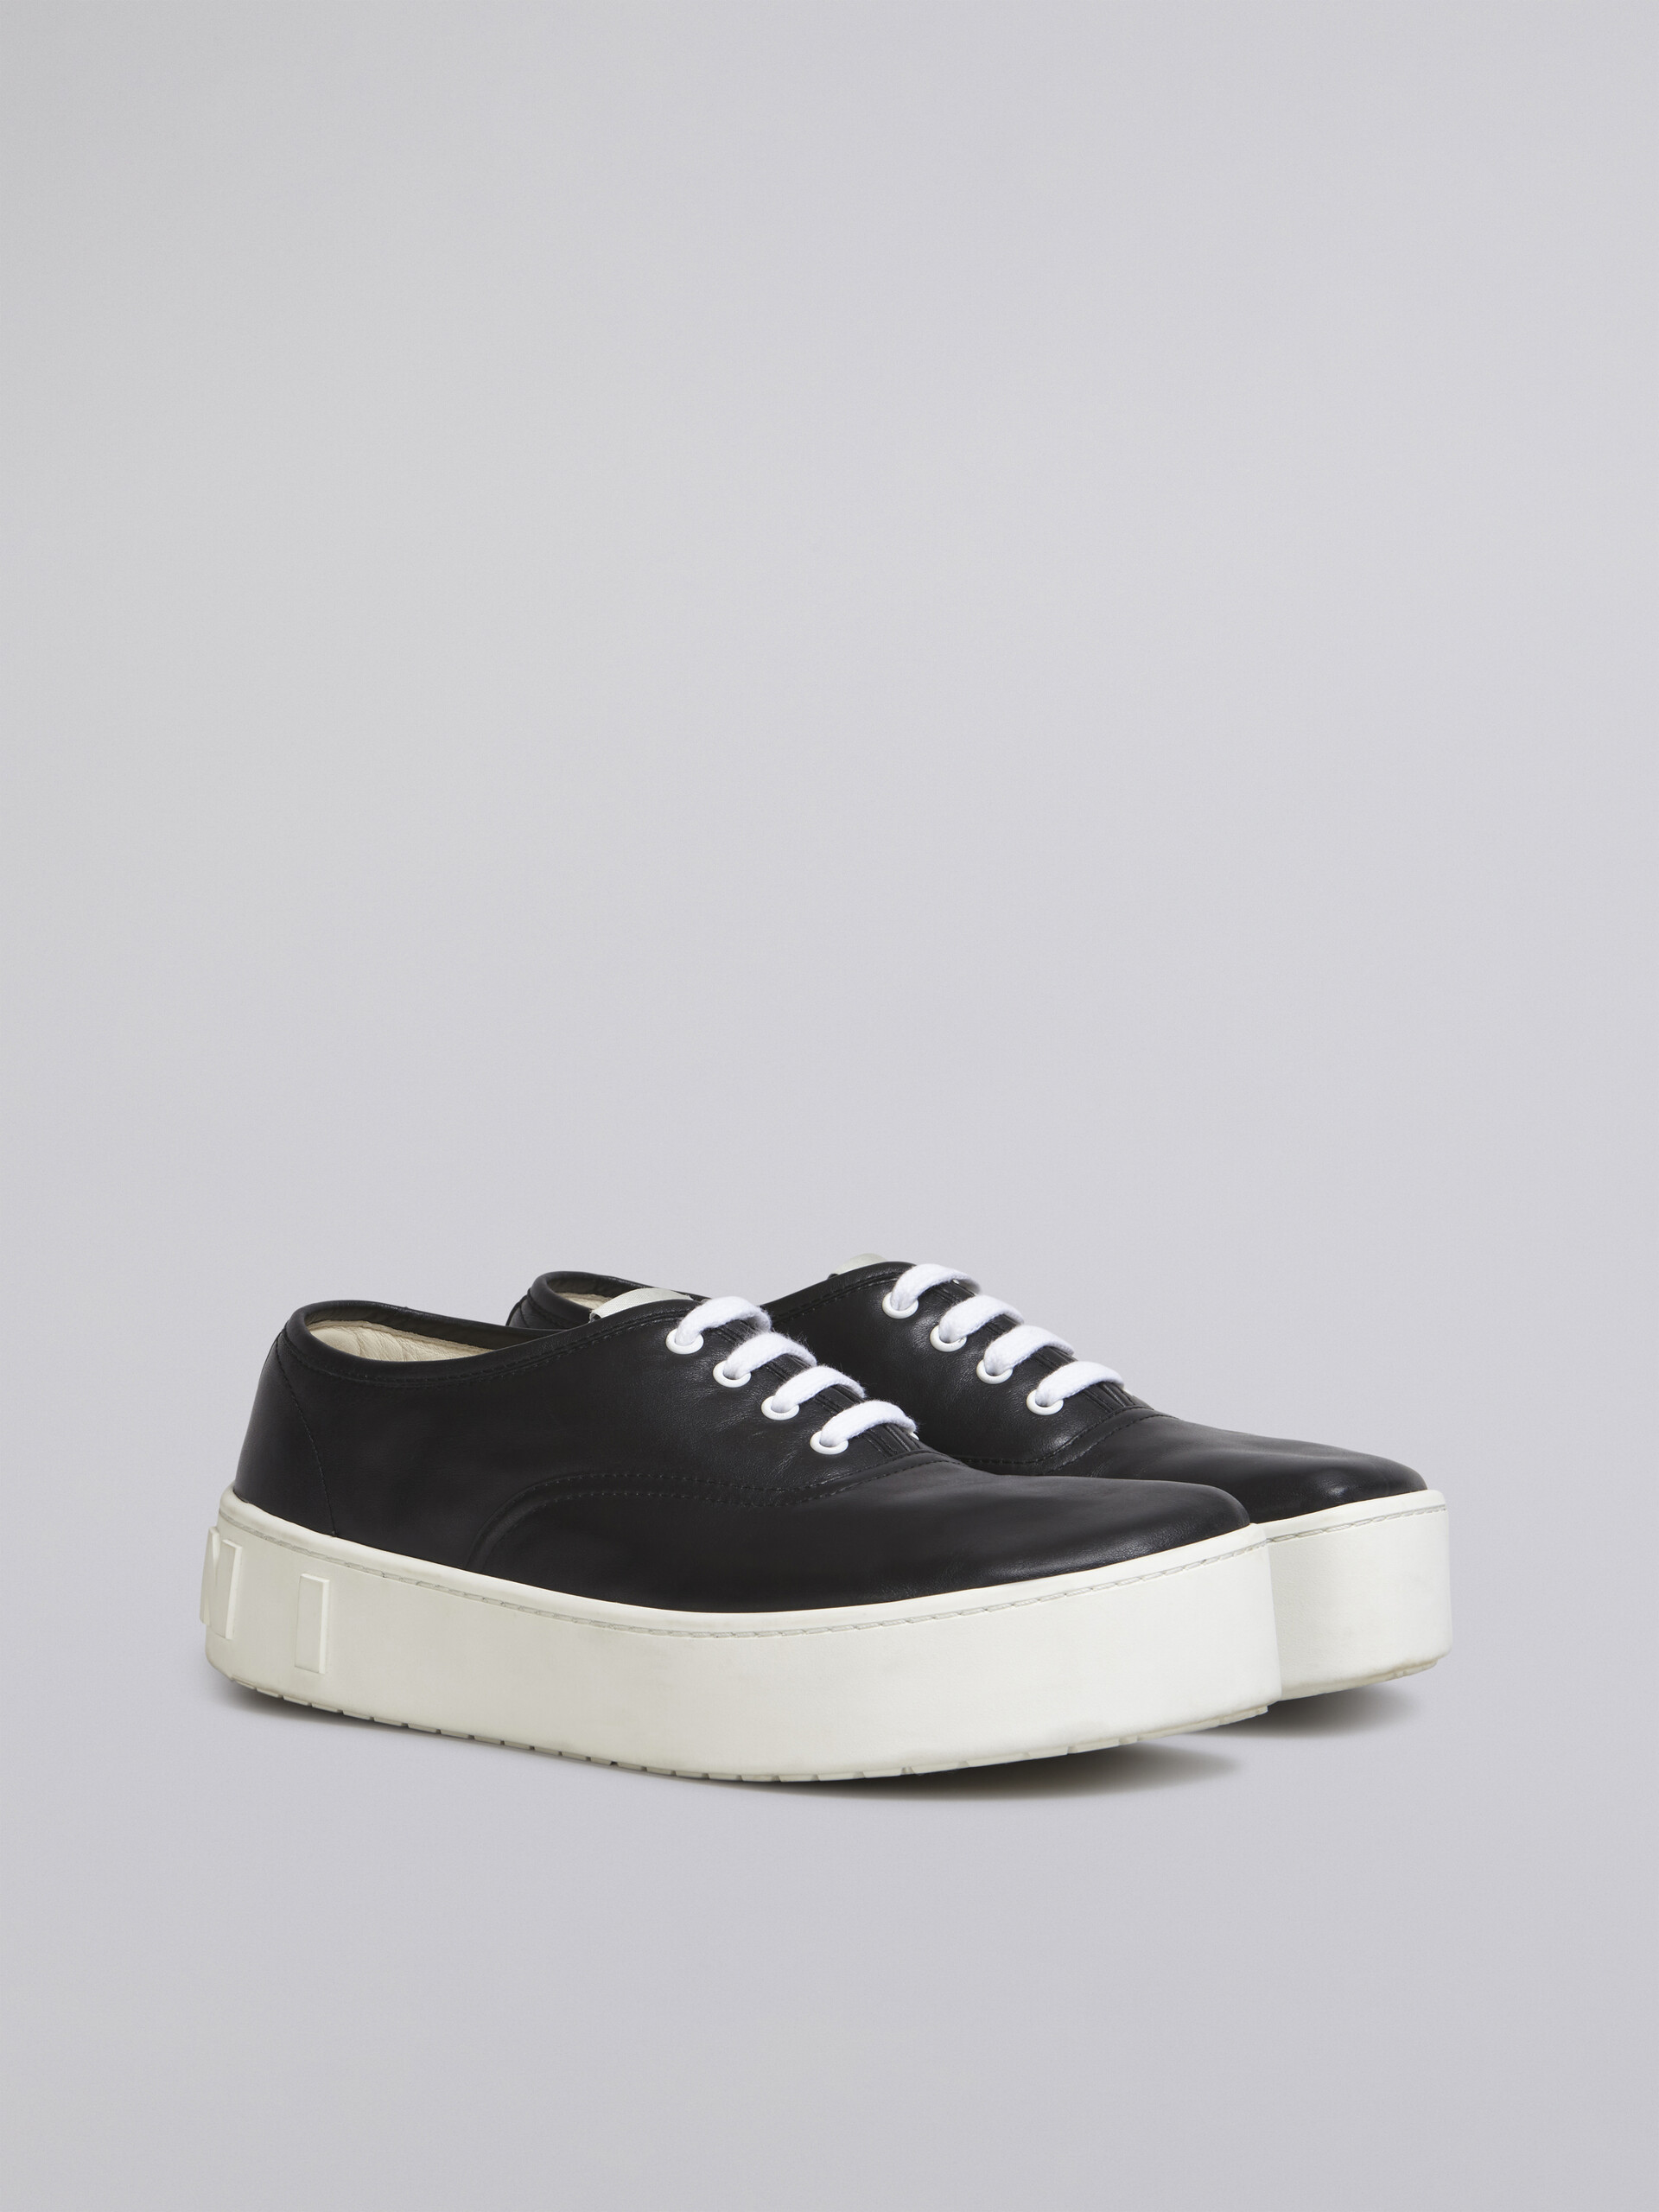 Black leather sneaker with maxi logo - Sneakers - Image 2